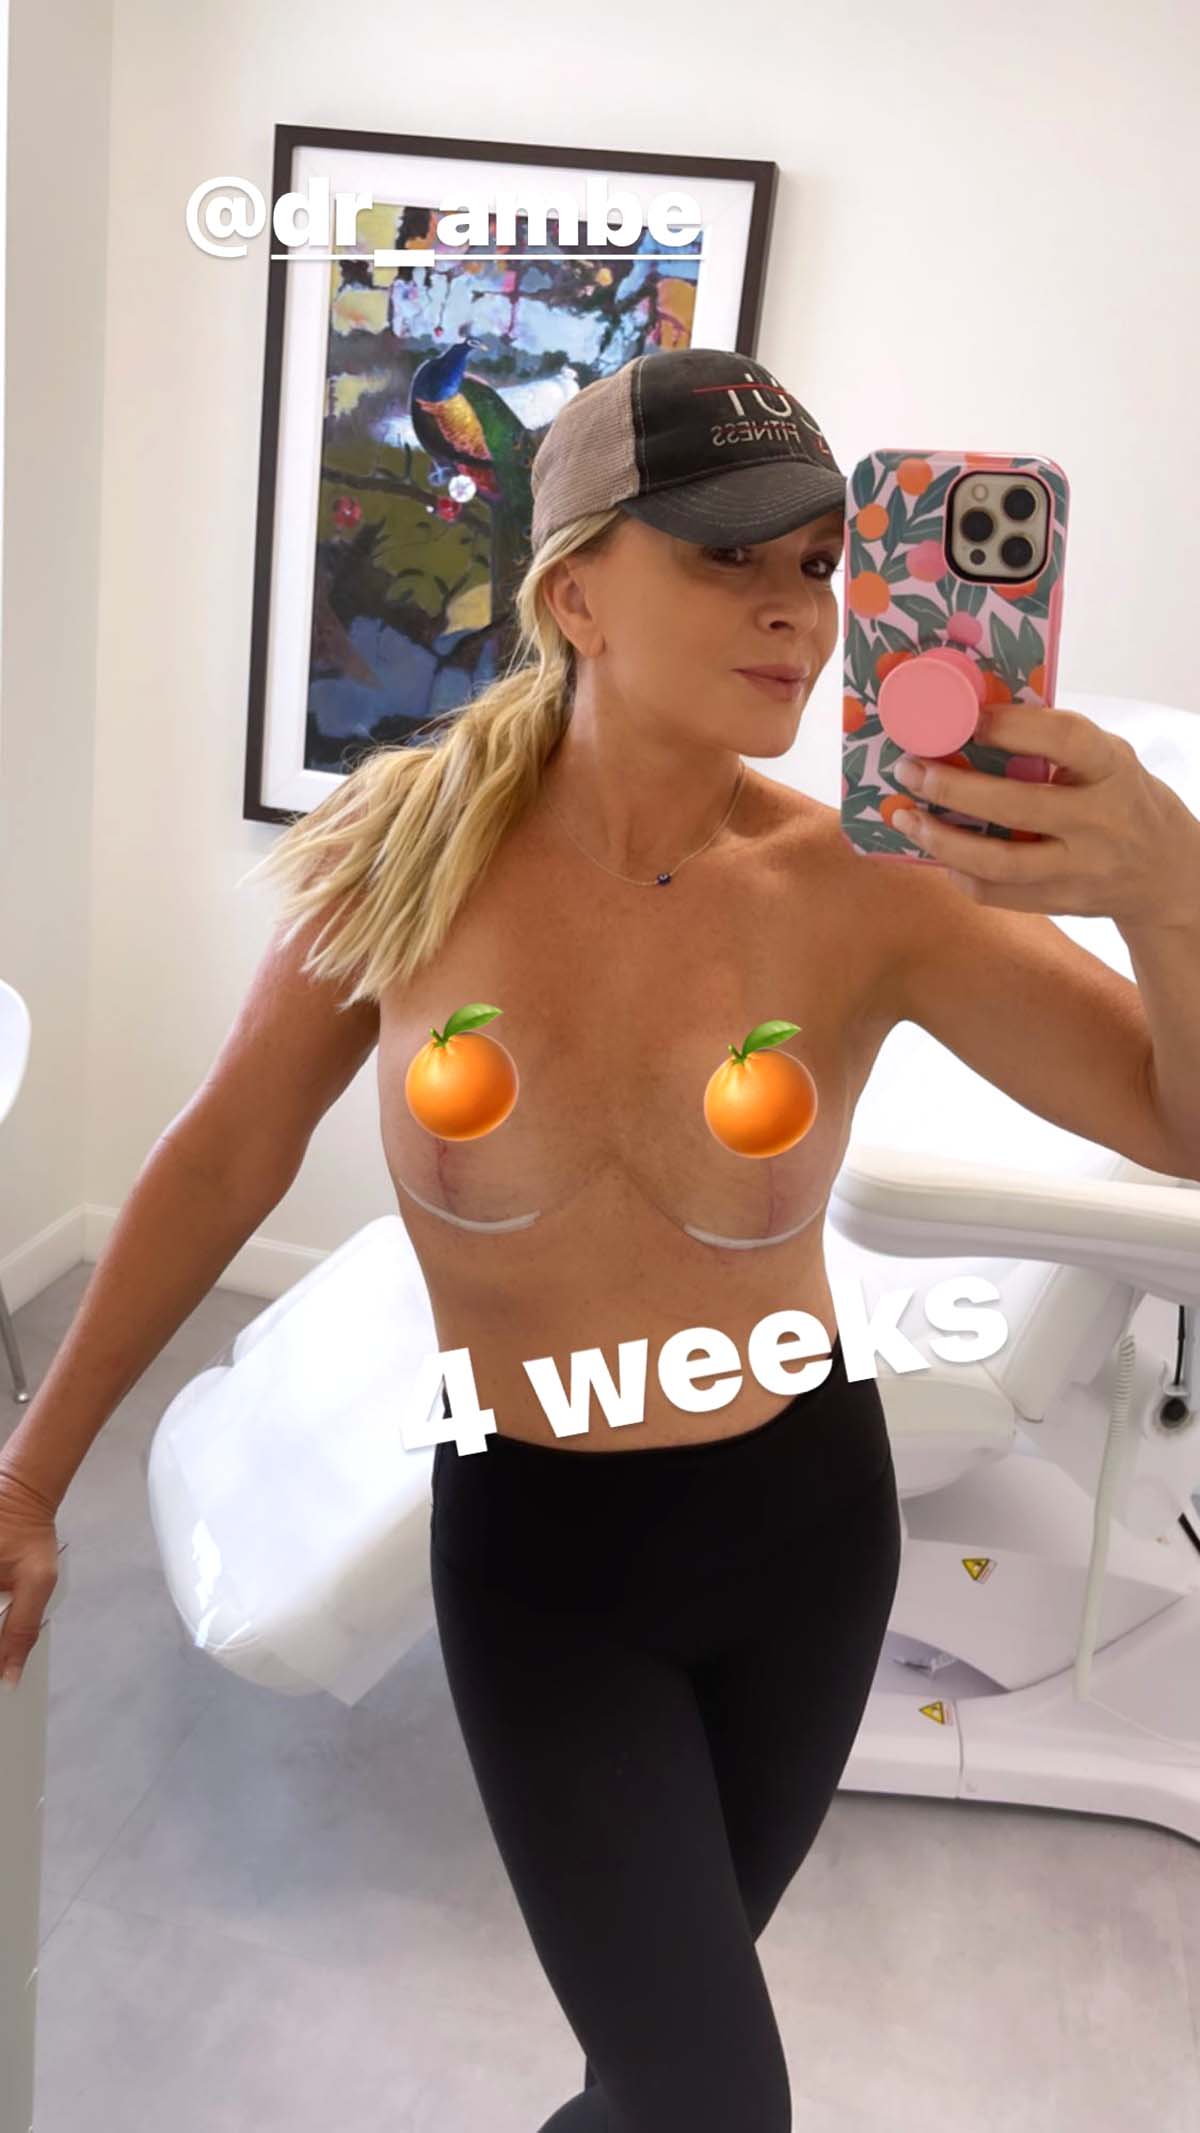 RHOCs Tamra Judge Shares Topless Pic 4 Weeks After Implant Removal